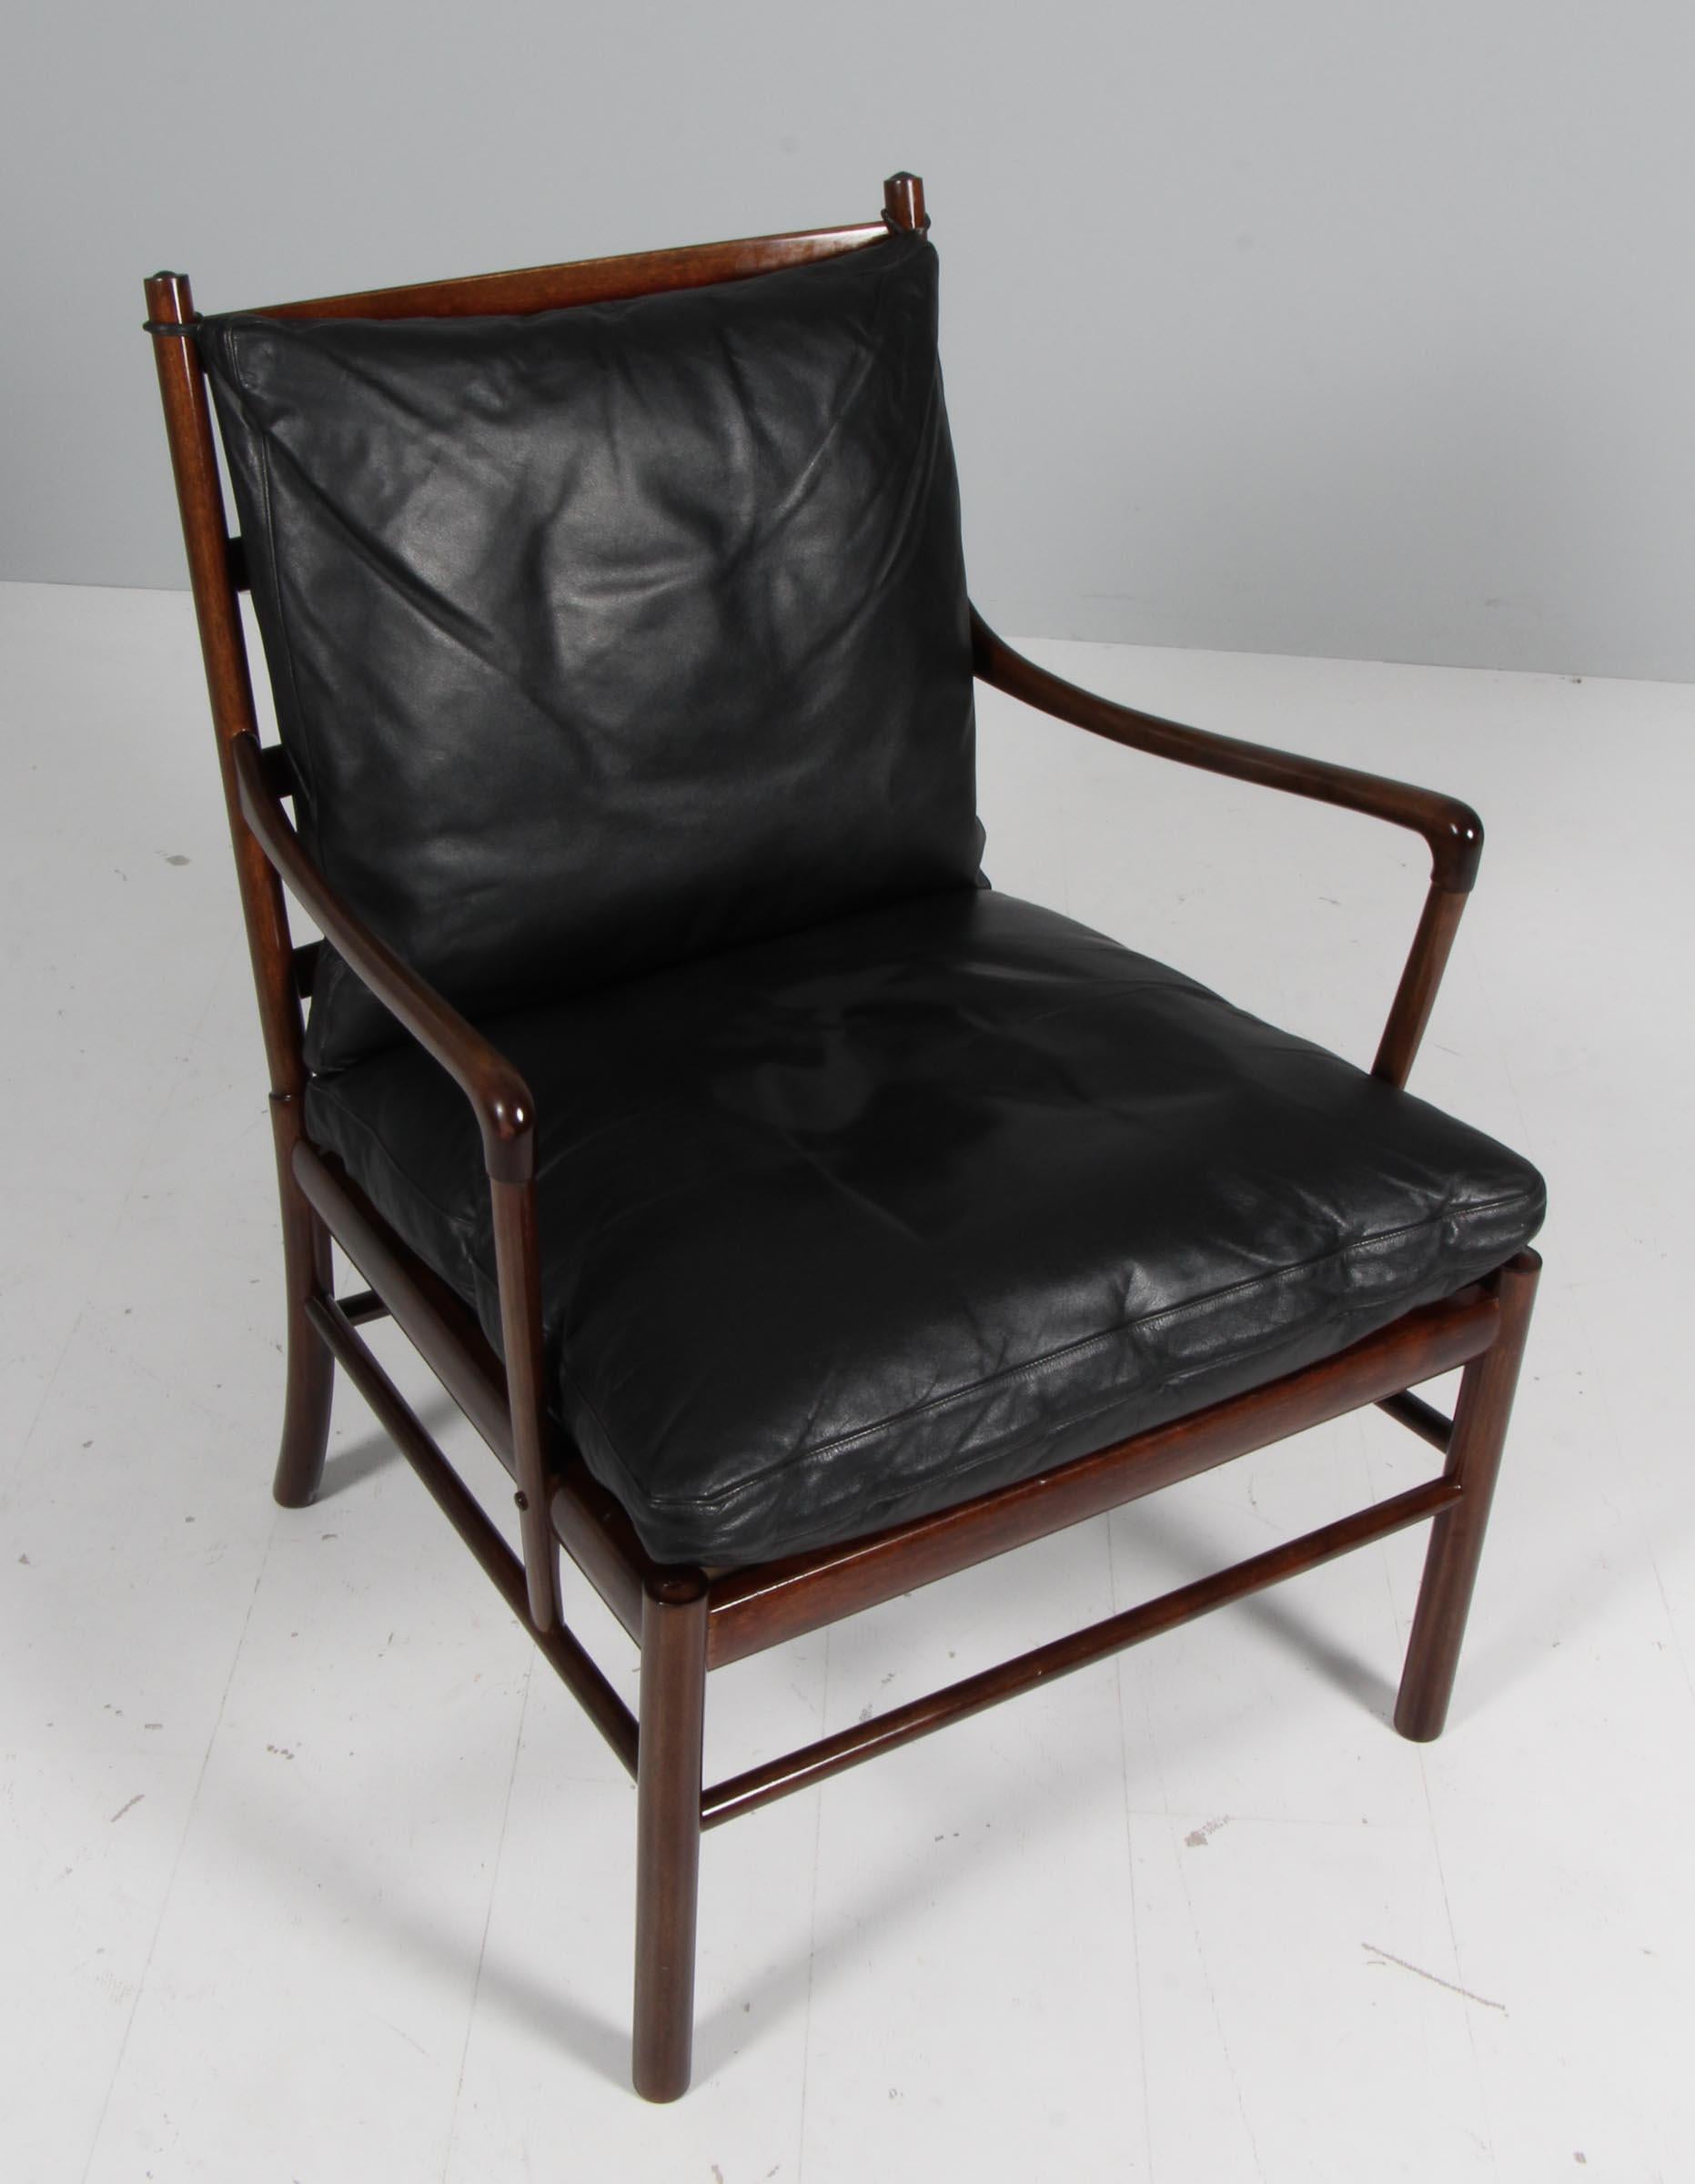 Ole Wanscher lounge chair original upholstered with black aniline leather.

Made in laquered mahogany. 

Model colonial chair, made by Poul Jeppesen.